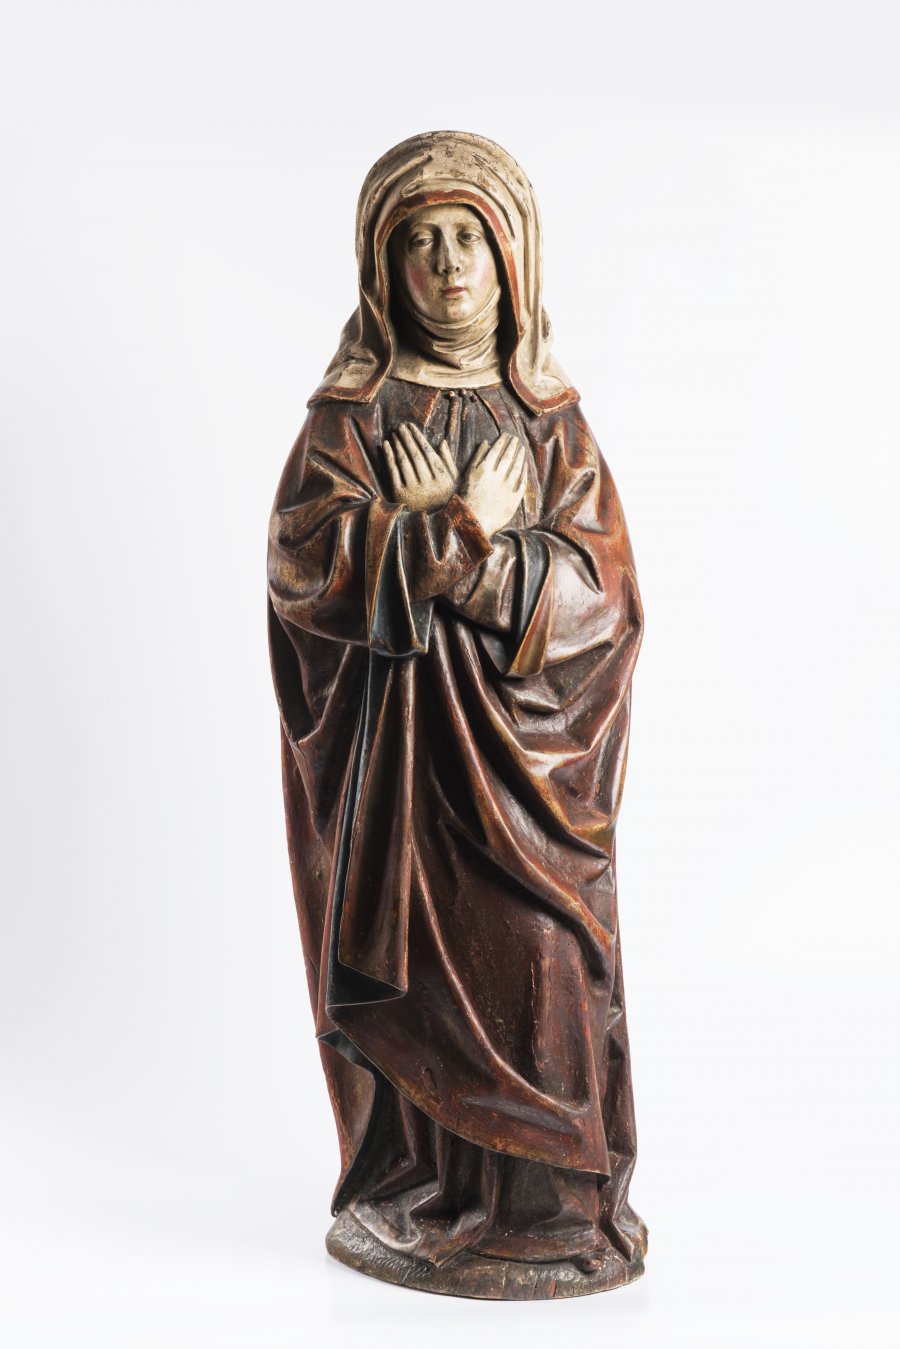 OUR LADY OF SORROWS